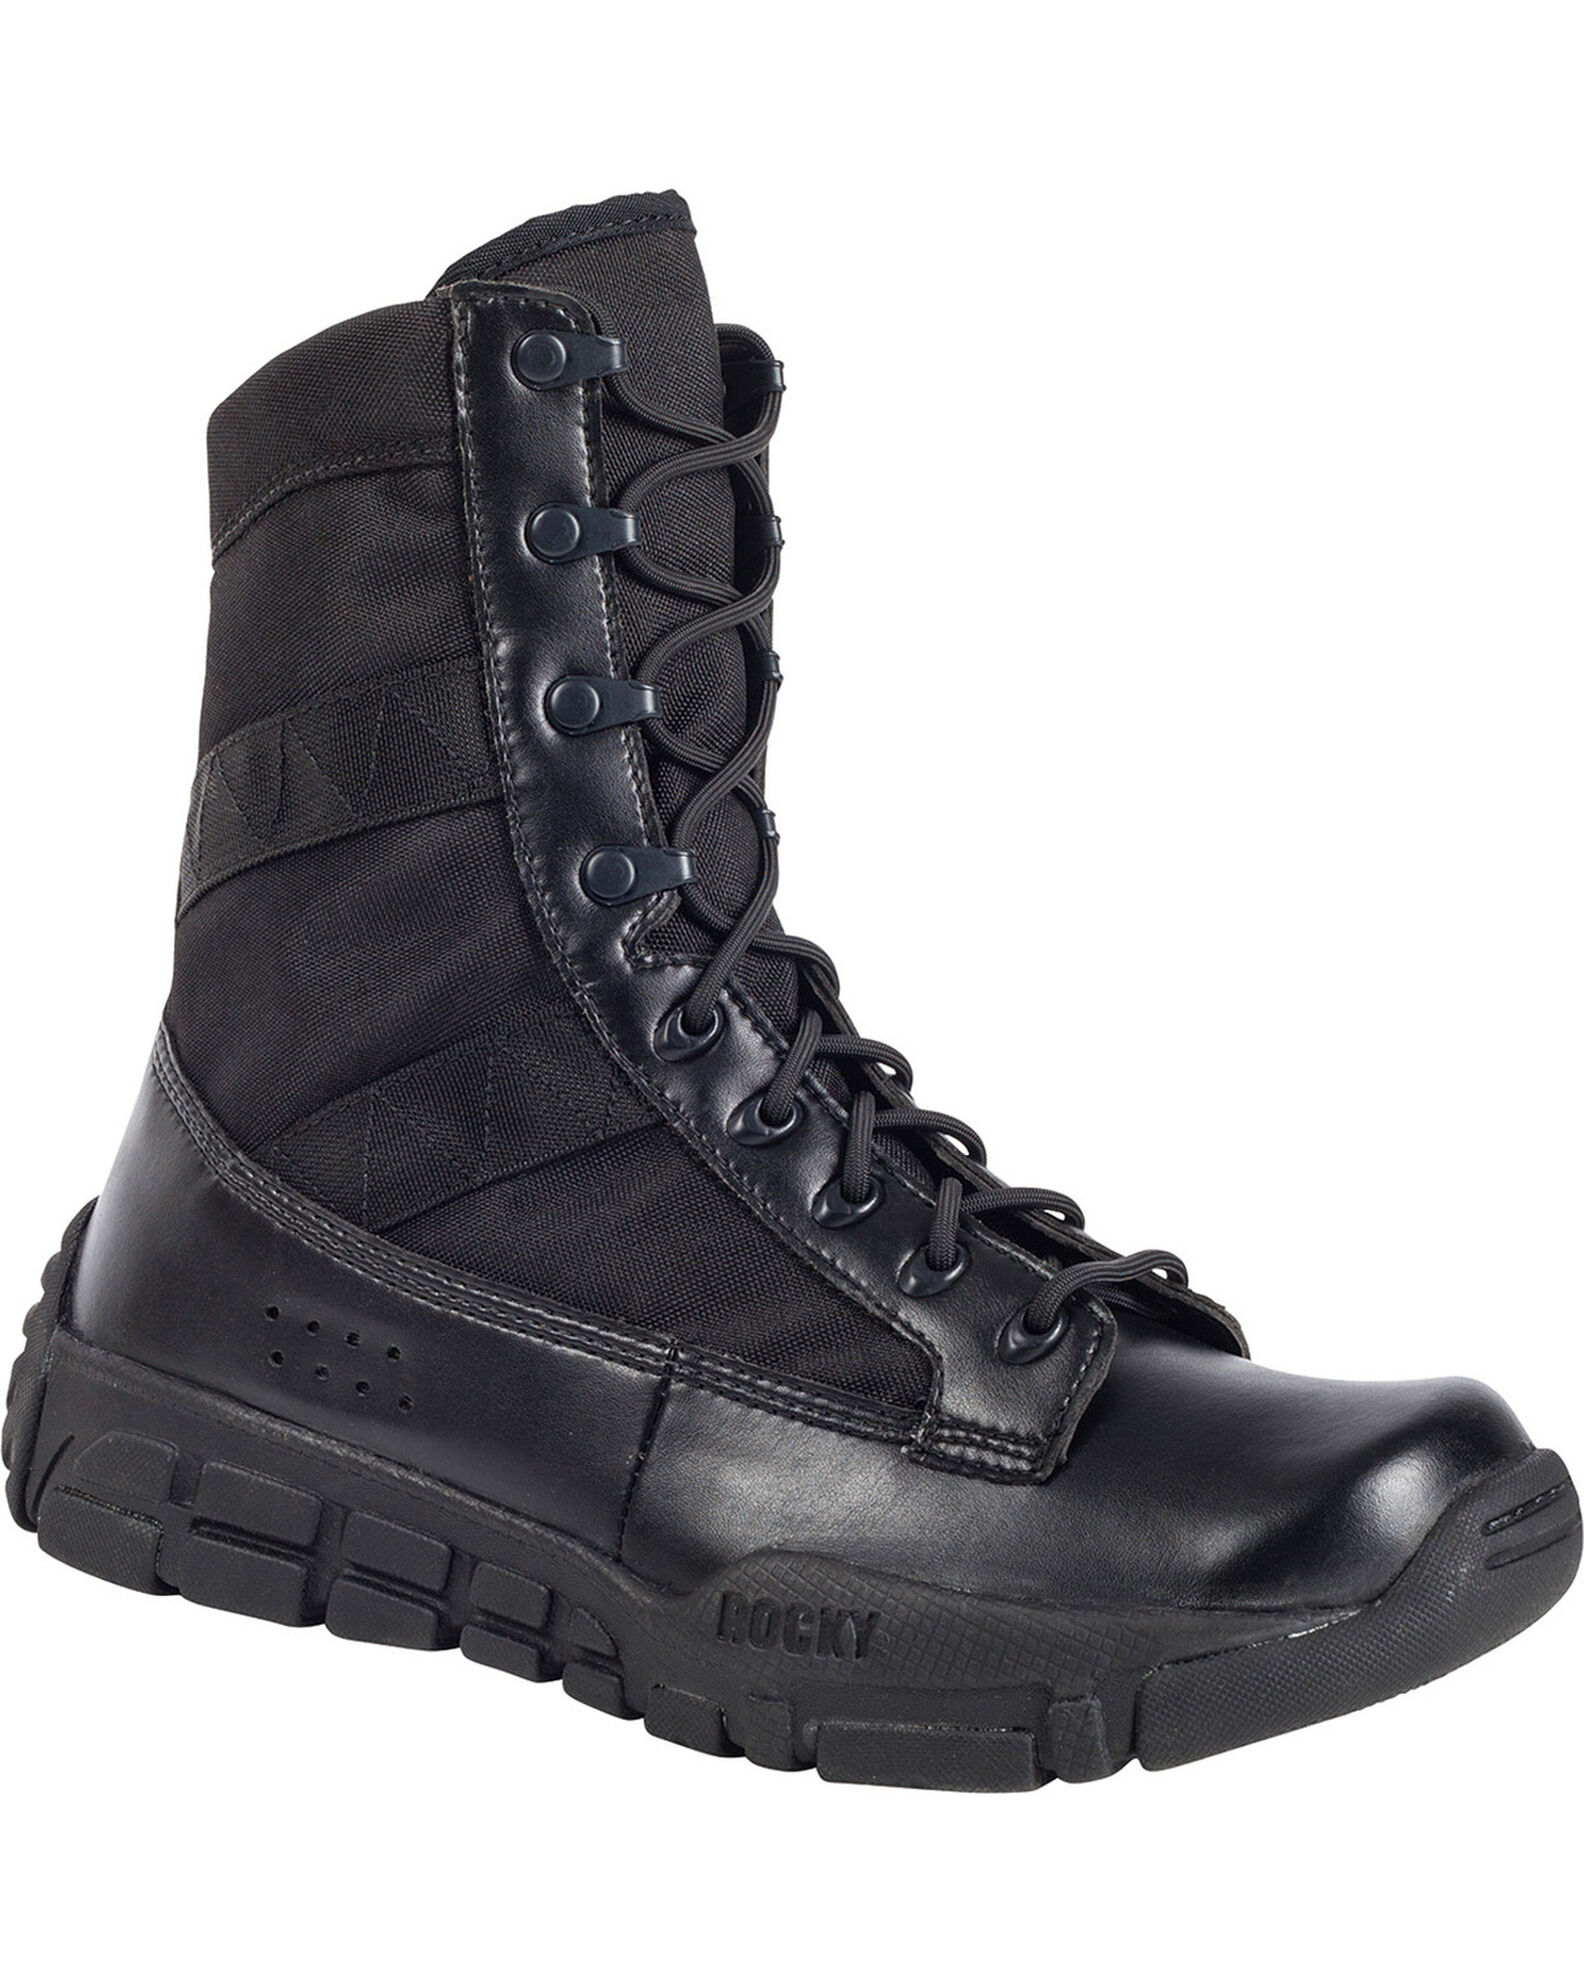 Rocky C4T Military-Inspired Duty Boots | Boot Barn